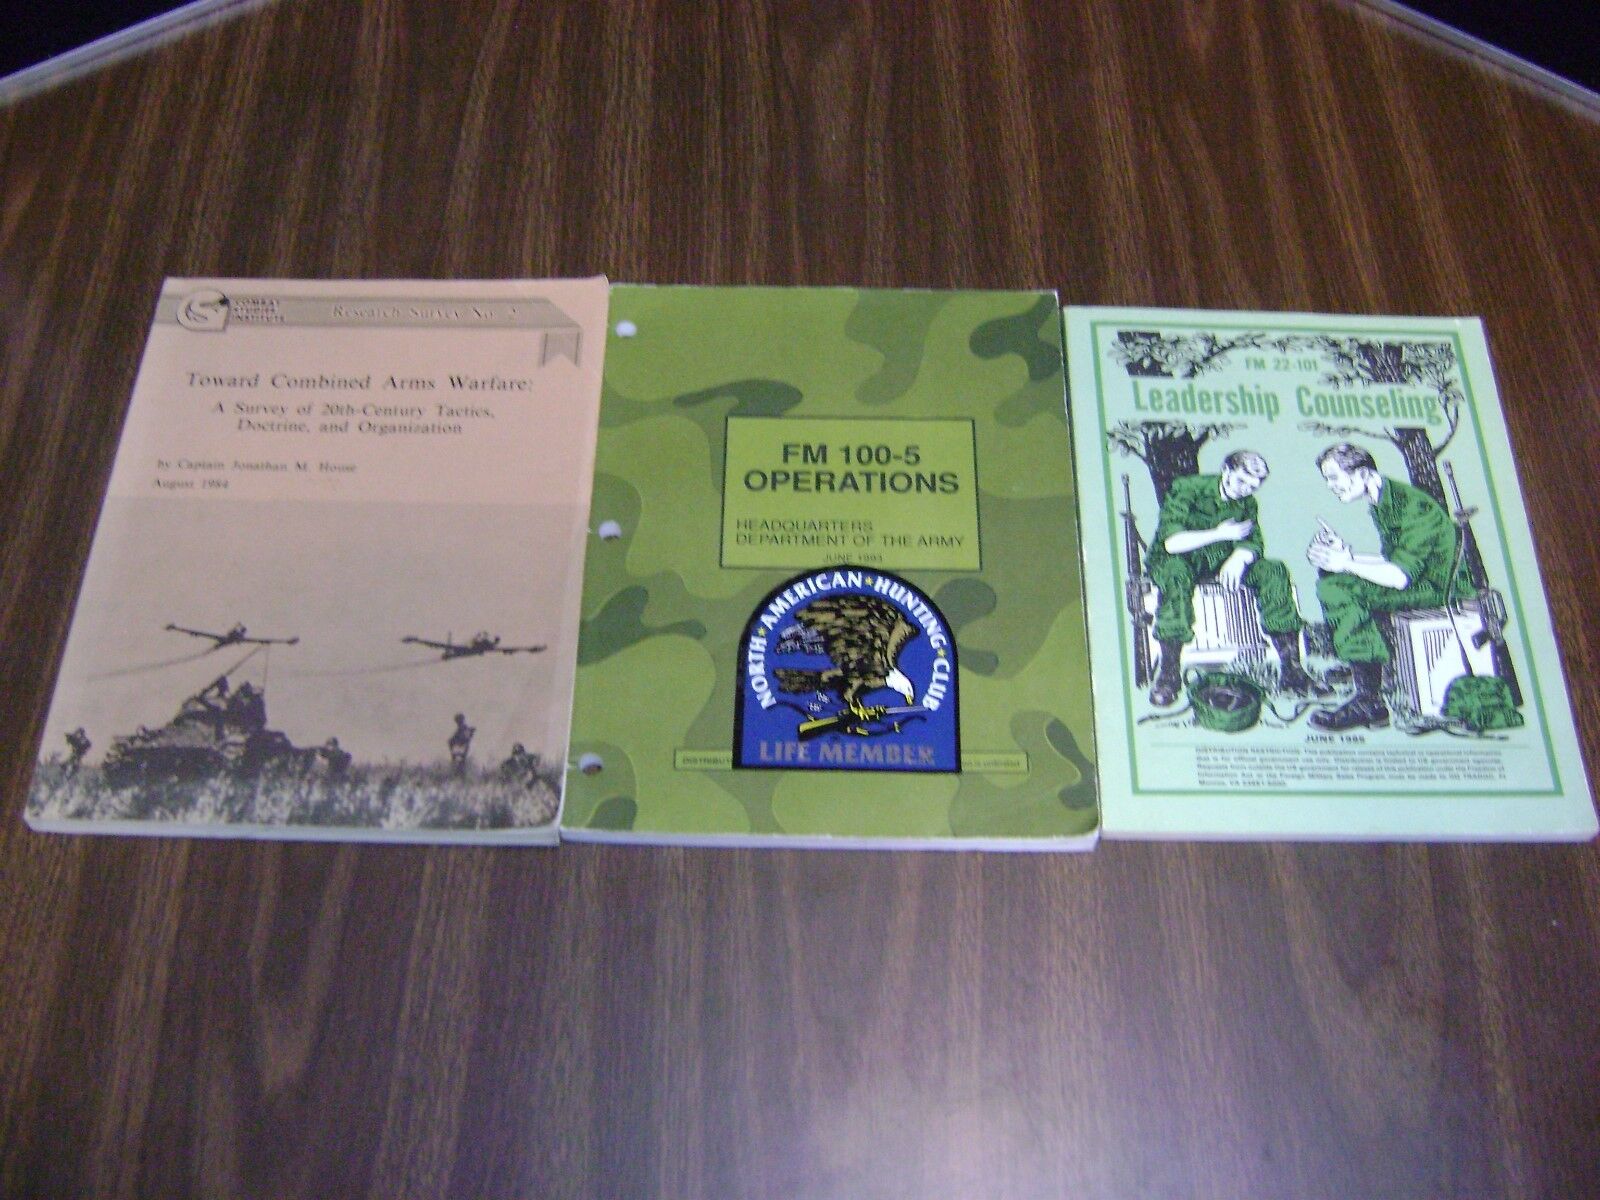 LOT OF 3: FM 22-101 Leadership Counseling 1985 , FM 100-5 , TOWARD COMBINED ARMS